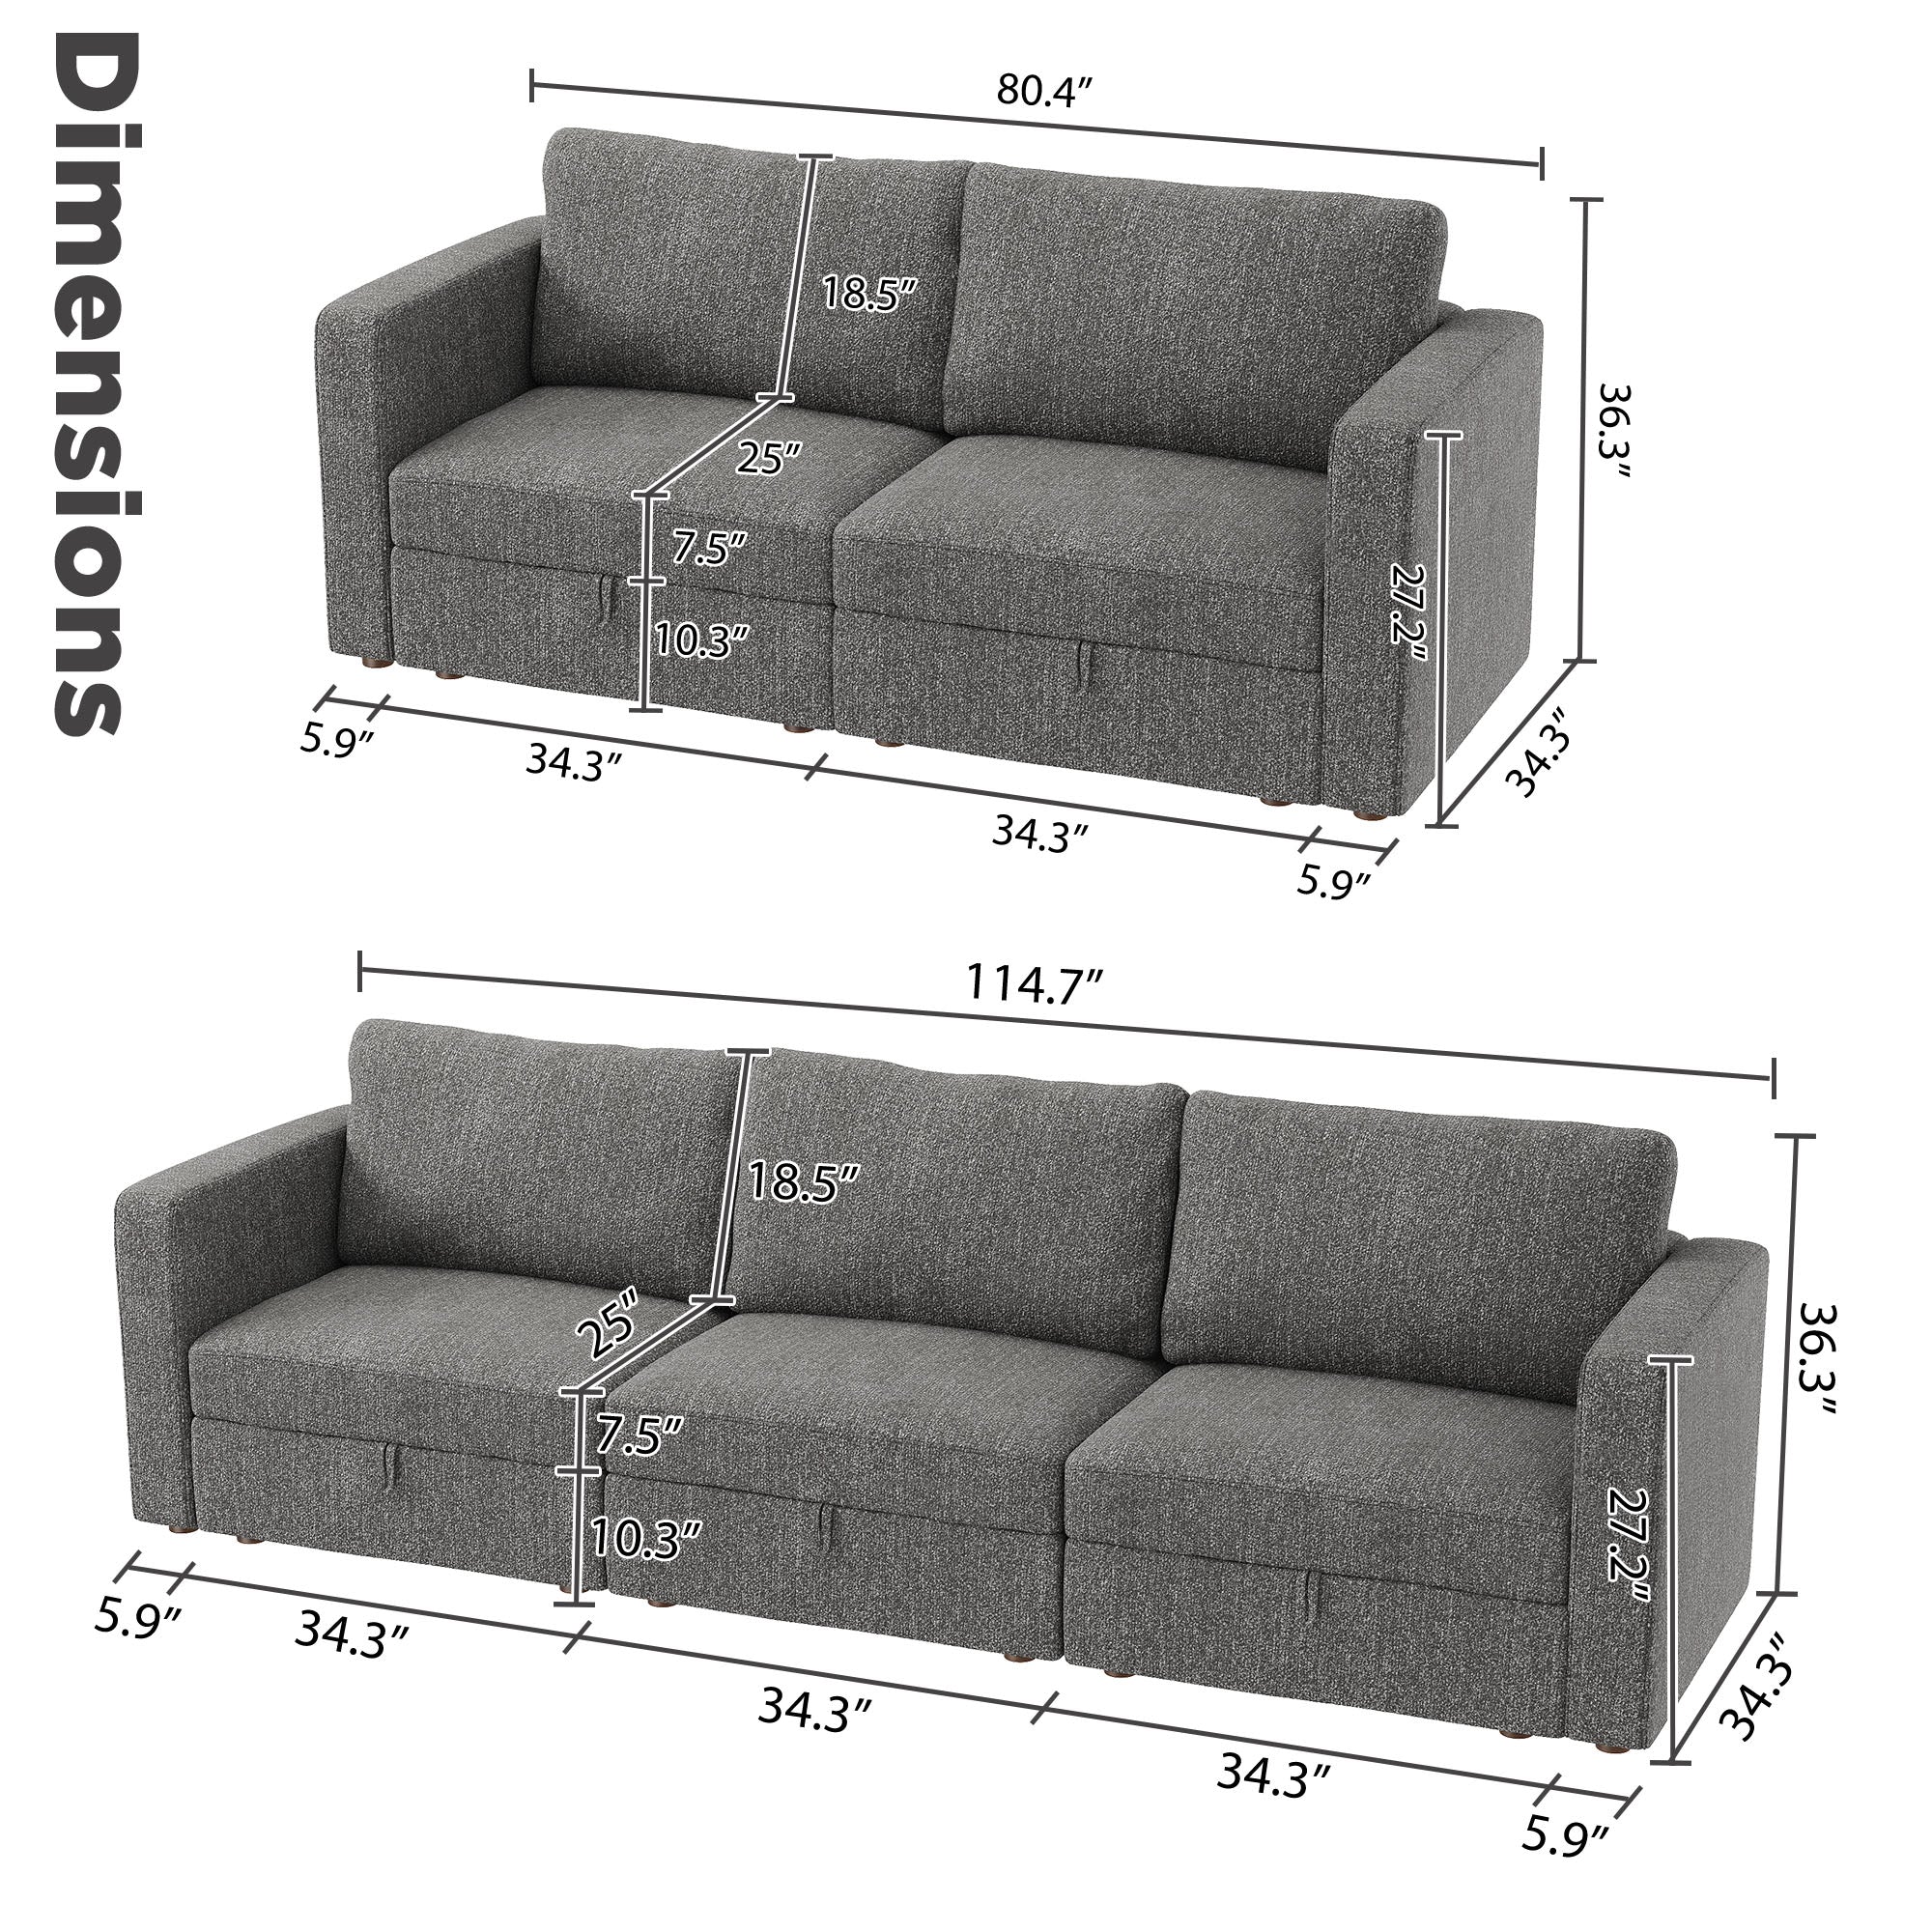 HONBAY 80.4" Wide Loveseat Sofa and 114.7" Wide Sectional Couch